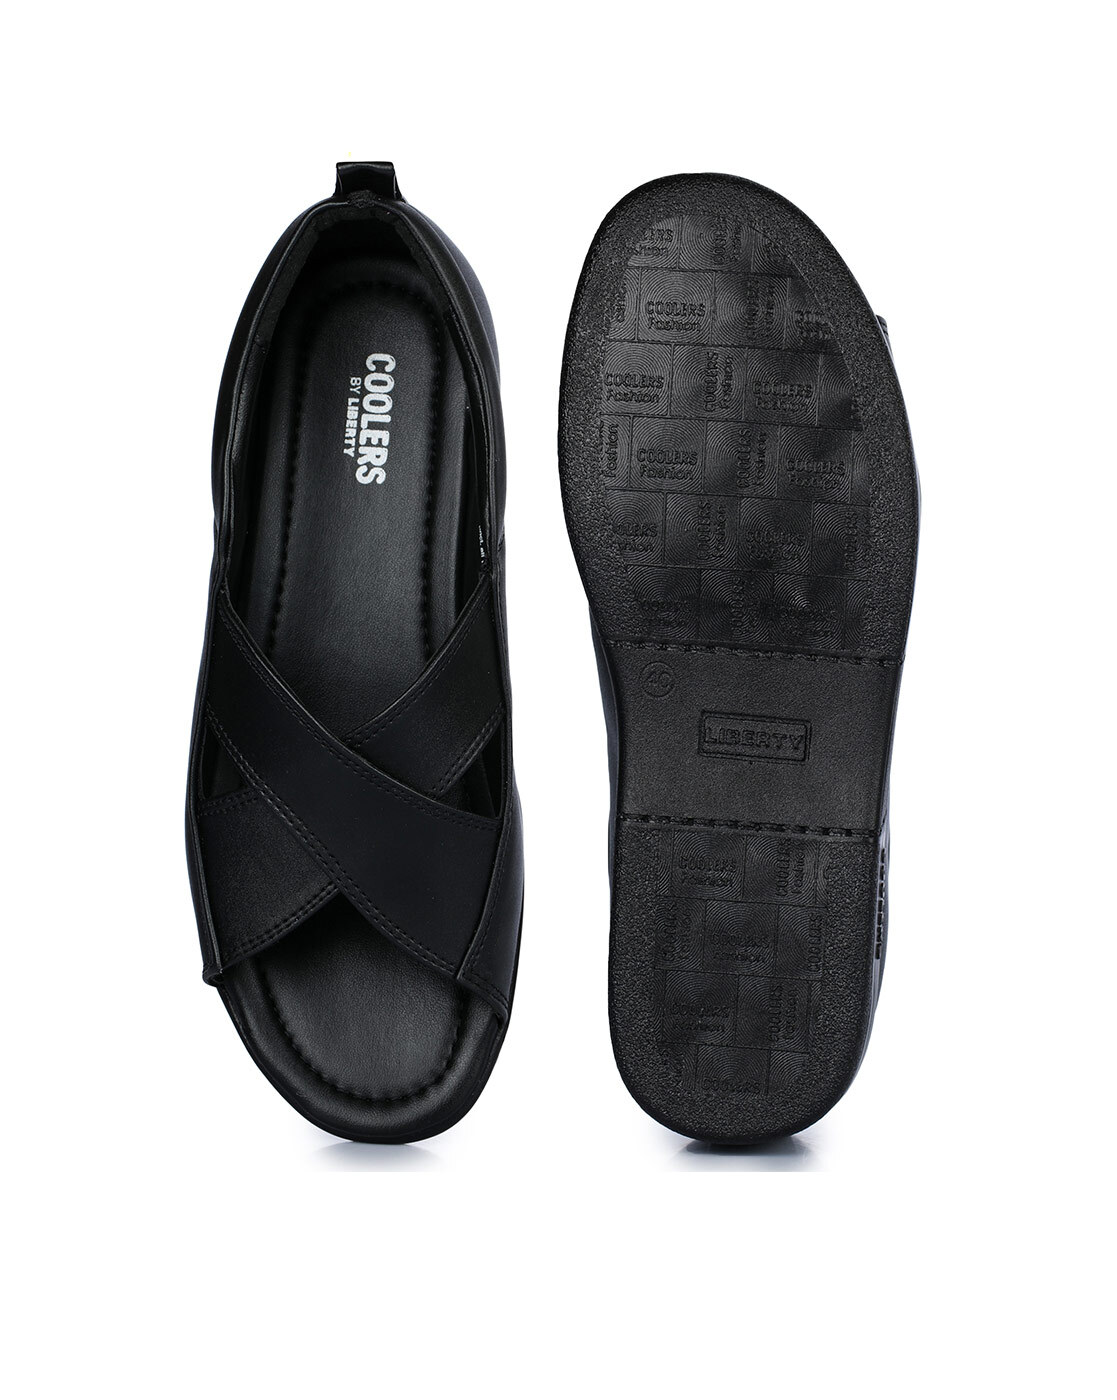 Coolers Formal (Black) Sandals For Mens 2050-26D By Liberty